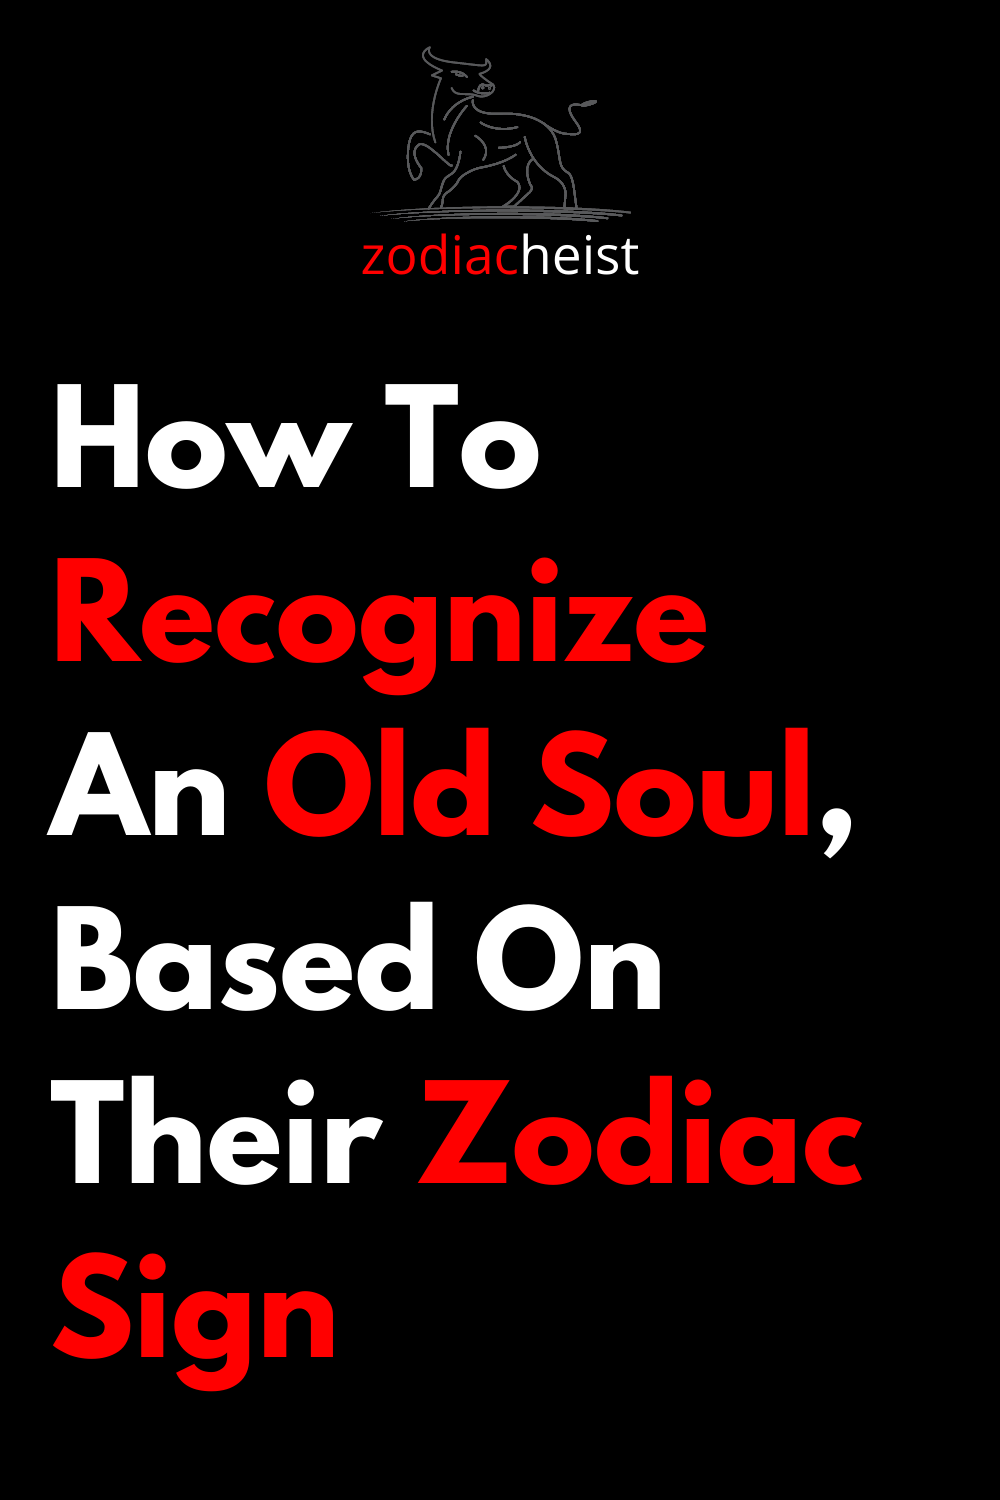 How To Recognize An Old Soul, Based On Their Zodiac Sign